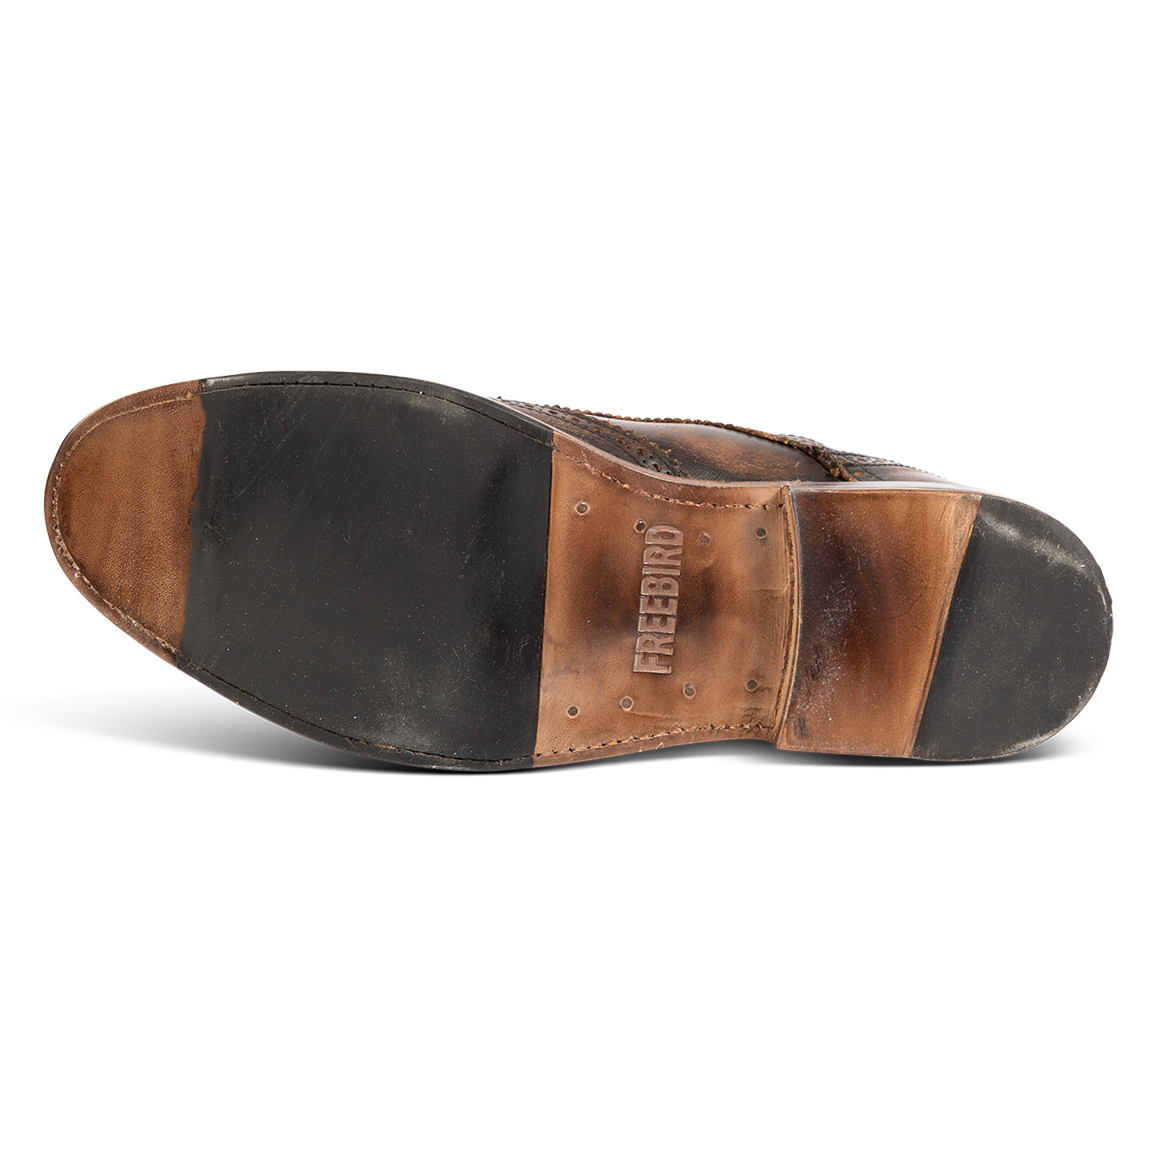 Leather sole imprinted with FREEBIRD on men's Kensington black distressed shoe